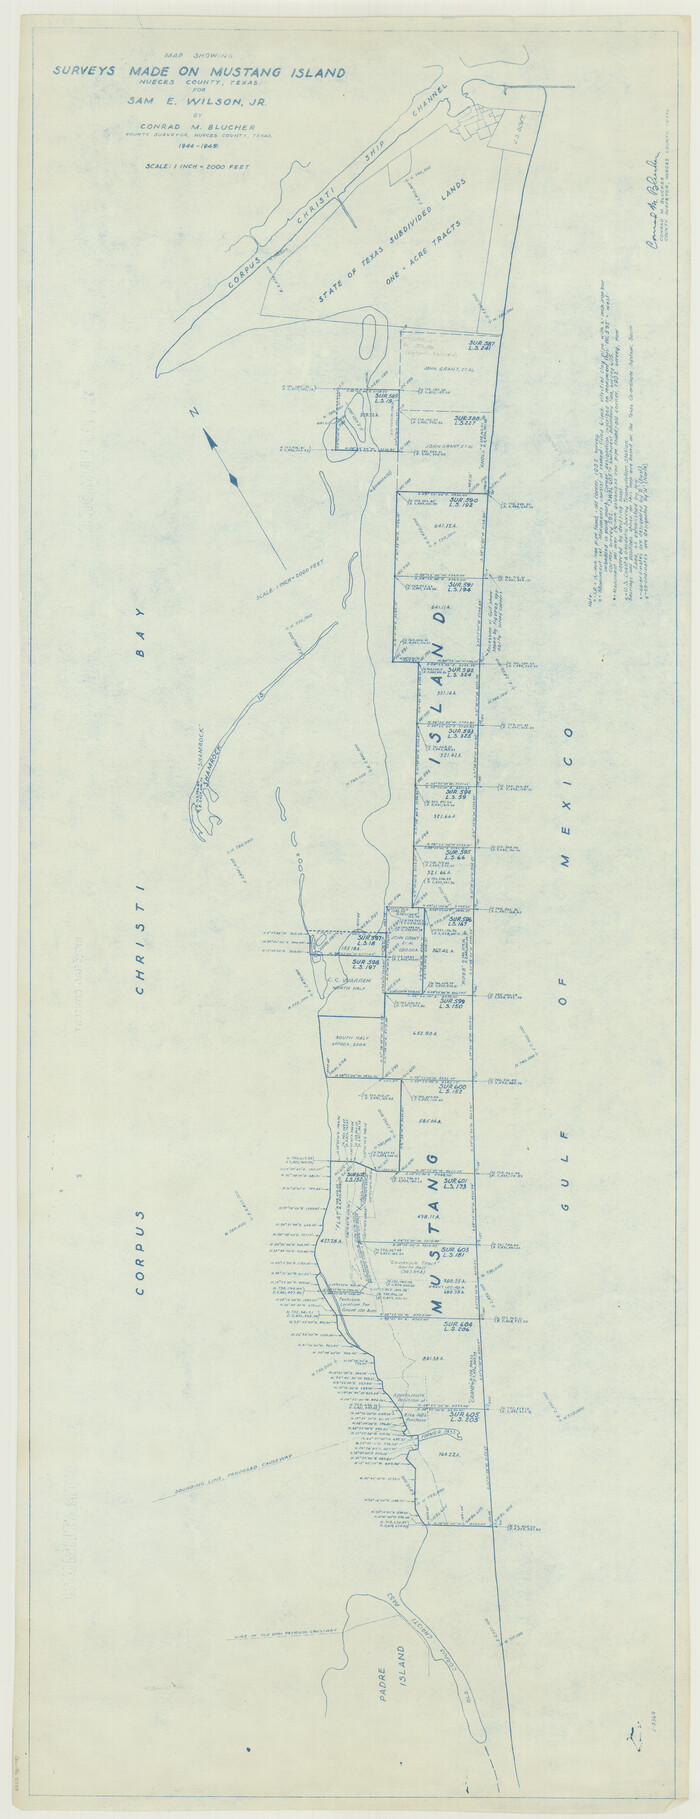 2948, Map showing surveys made on Mustang Island, General Map Collection